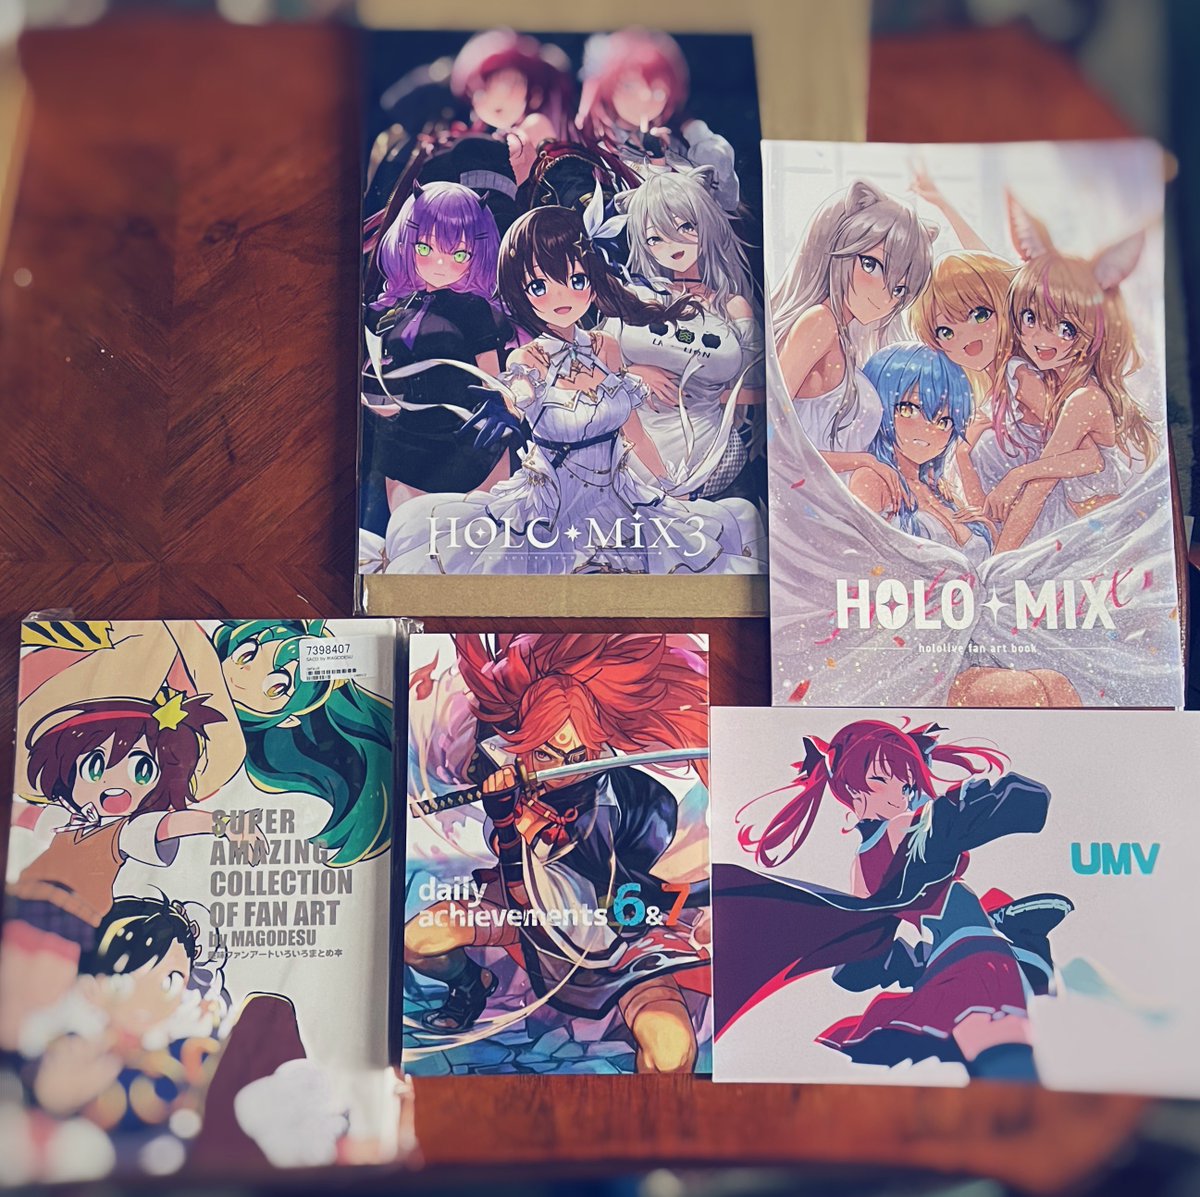 Ahhhh my books from Comiket came in! Hungryclicker's books is thick as hell! 